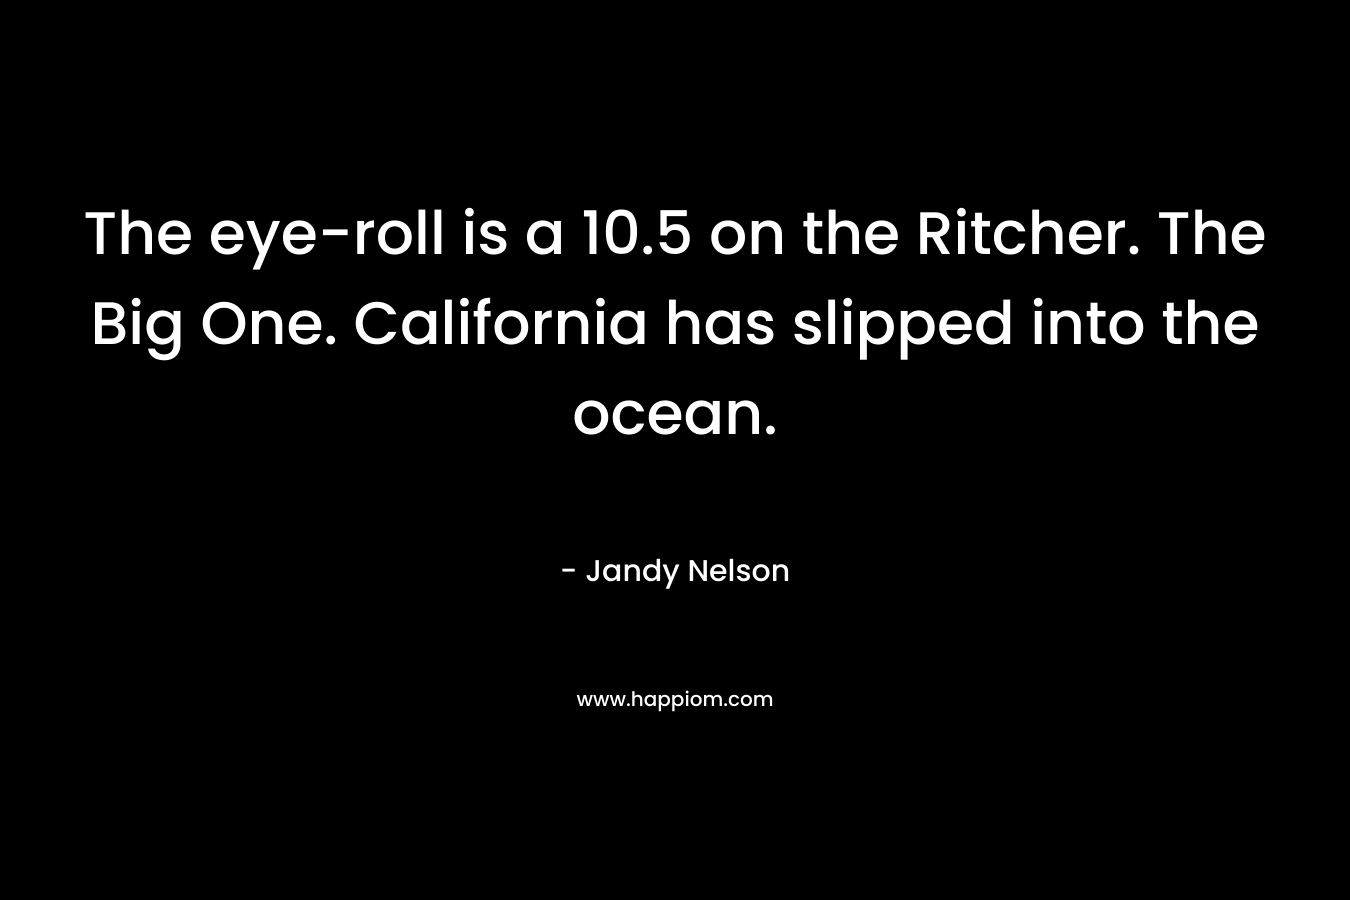 The eye-roll is a 10.5 on the Ritcher. The Big One. California has slipped into the ocean. – Jandy Nelson